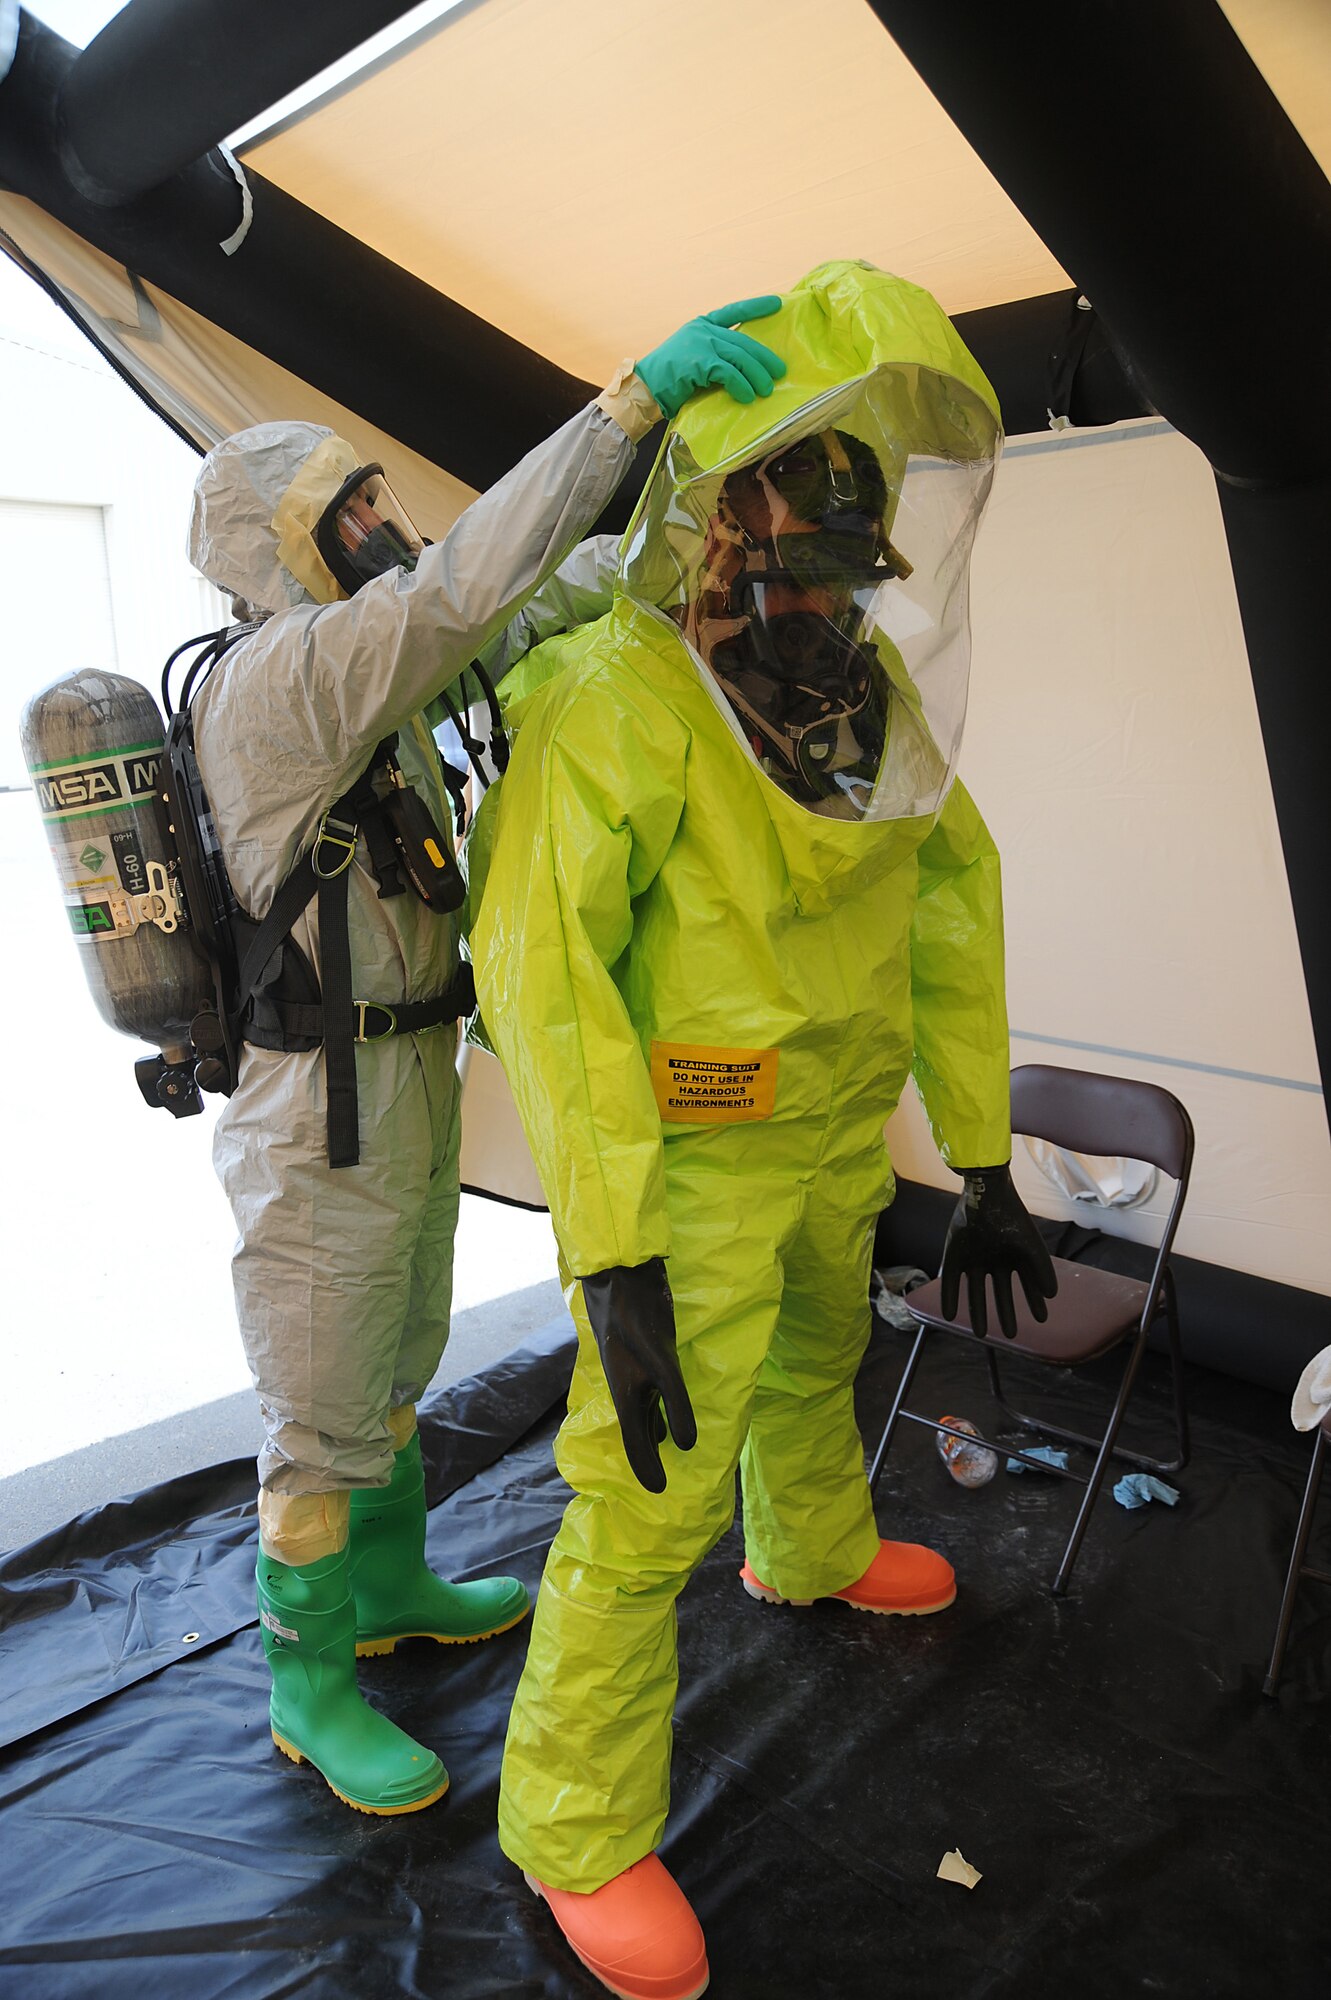 Master Sgt. Jason Golden, 380th Expeditionary Civil Engineer Squadron, assists Senior Airman Bradley Cook, 380th ECES, with sealing off his level-A hazmat suit, May 2 at an undisclosed location in Southwest Asia. The 380th ECES Readiness and Emergency Management Flight, conducted hazmat decontamination training to keep their proficiency skills sharp and ready for real world. Sergeant Golden is deployed from Andres AFB, Md. and hails from Wolf Creek, Mont. Airman Cook is deployed from Andrews AFB, Md. and hails from El Paso, Texas. (U.S. Air Force photo by Senior Airman Brian J. Ellis) (Released)